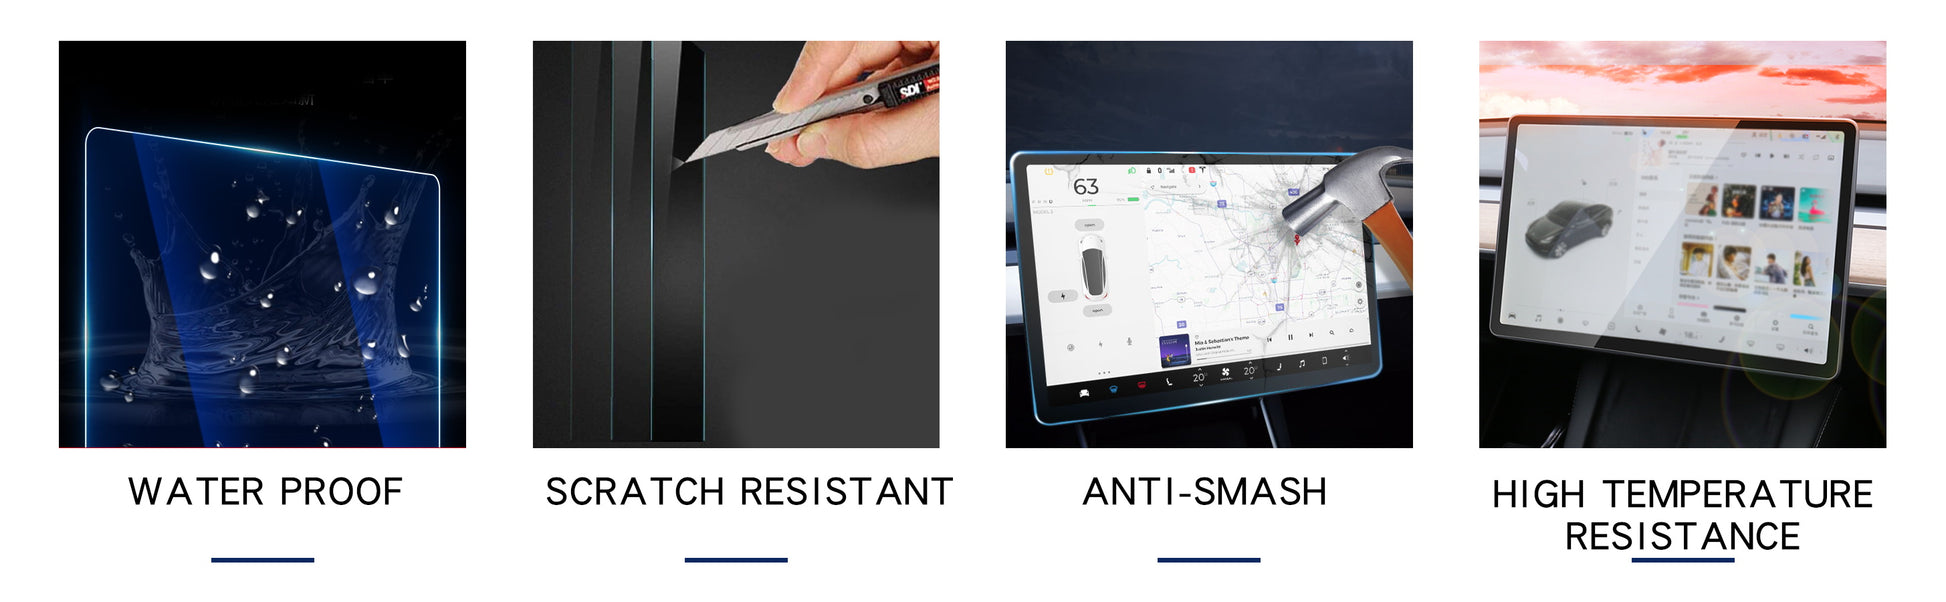 Tesla Model 3/Y Screen Protector High-strength tempered glass protect Model 3/Y screen from scratches and impacts a nice Model 3 accessory for GPS screen The combination of oleophobic layer & anti-glare layer makes the navigation screen no longer dazzling and does not leave fingerprints.